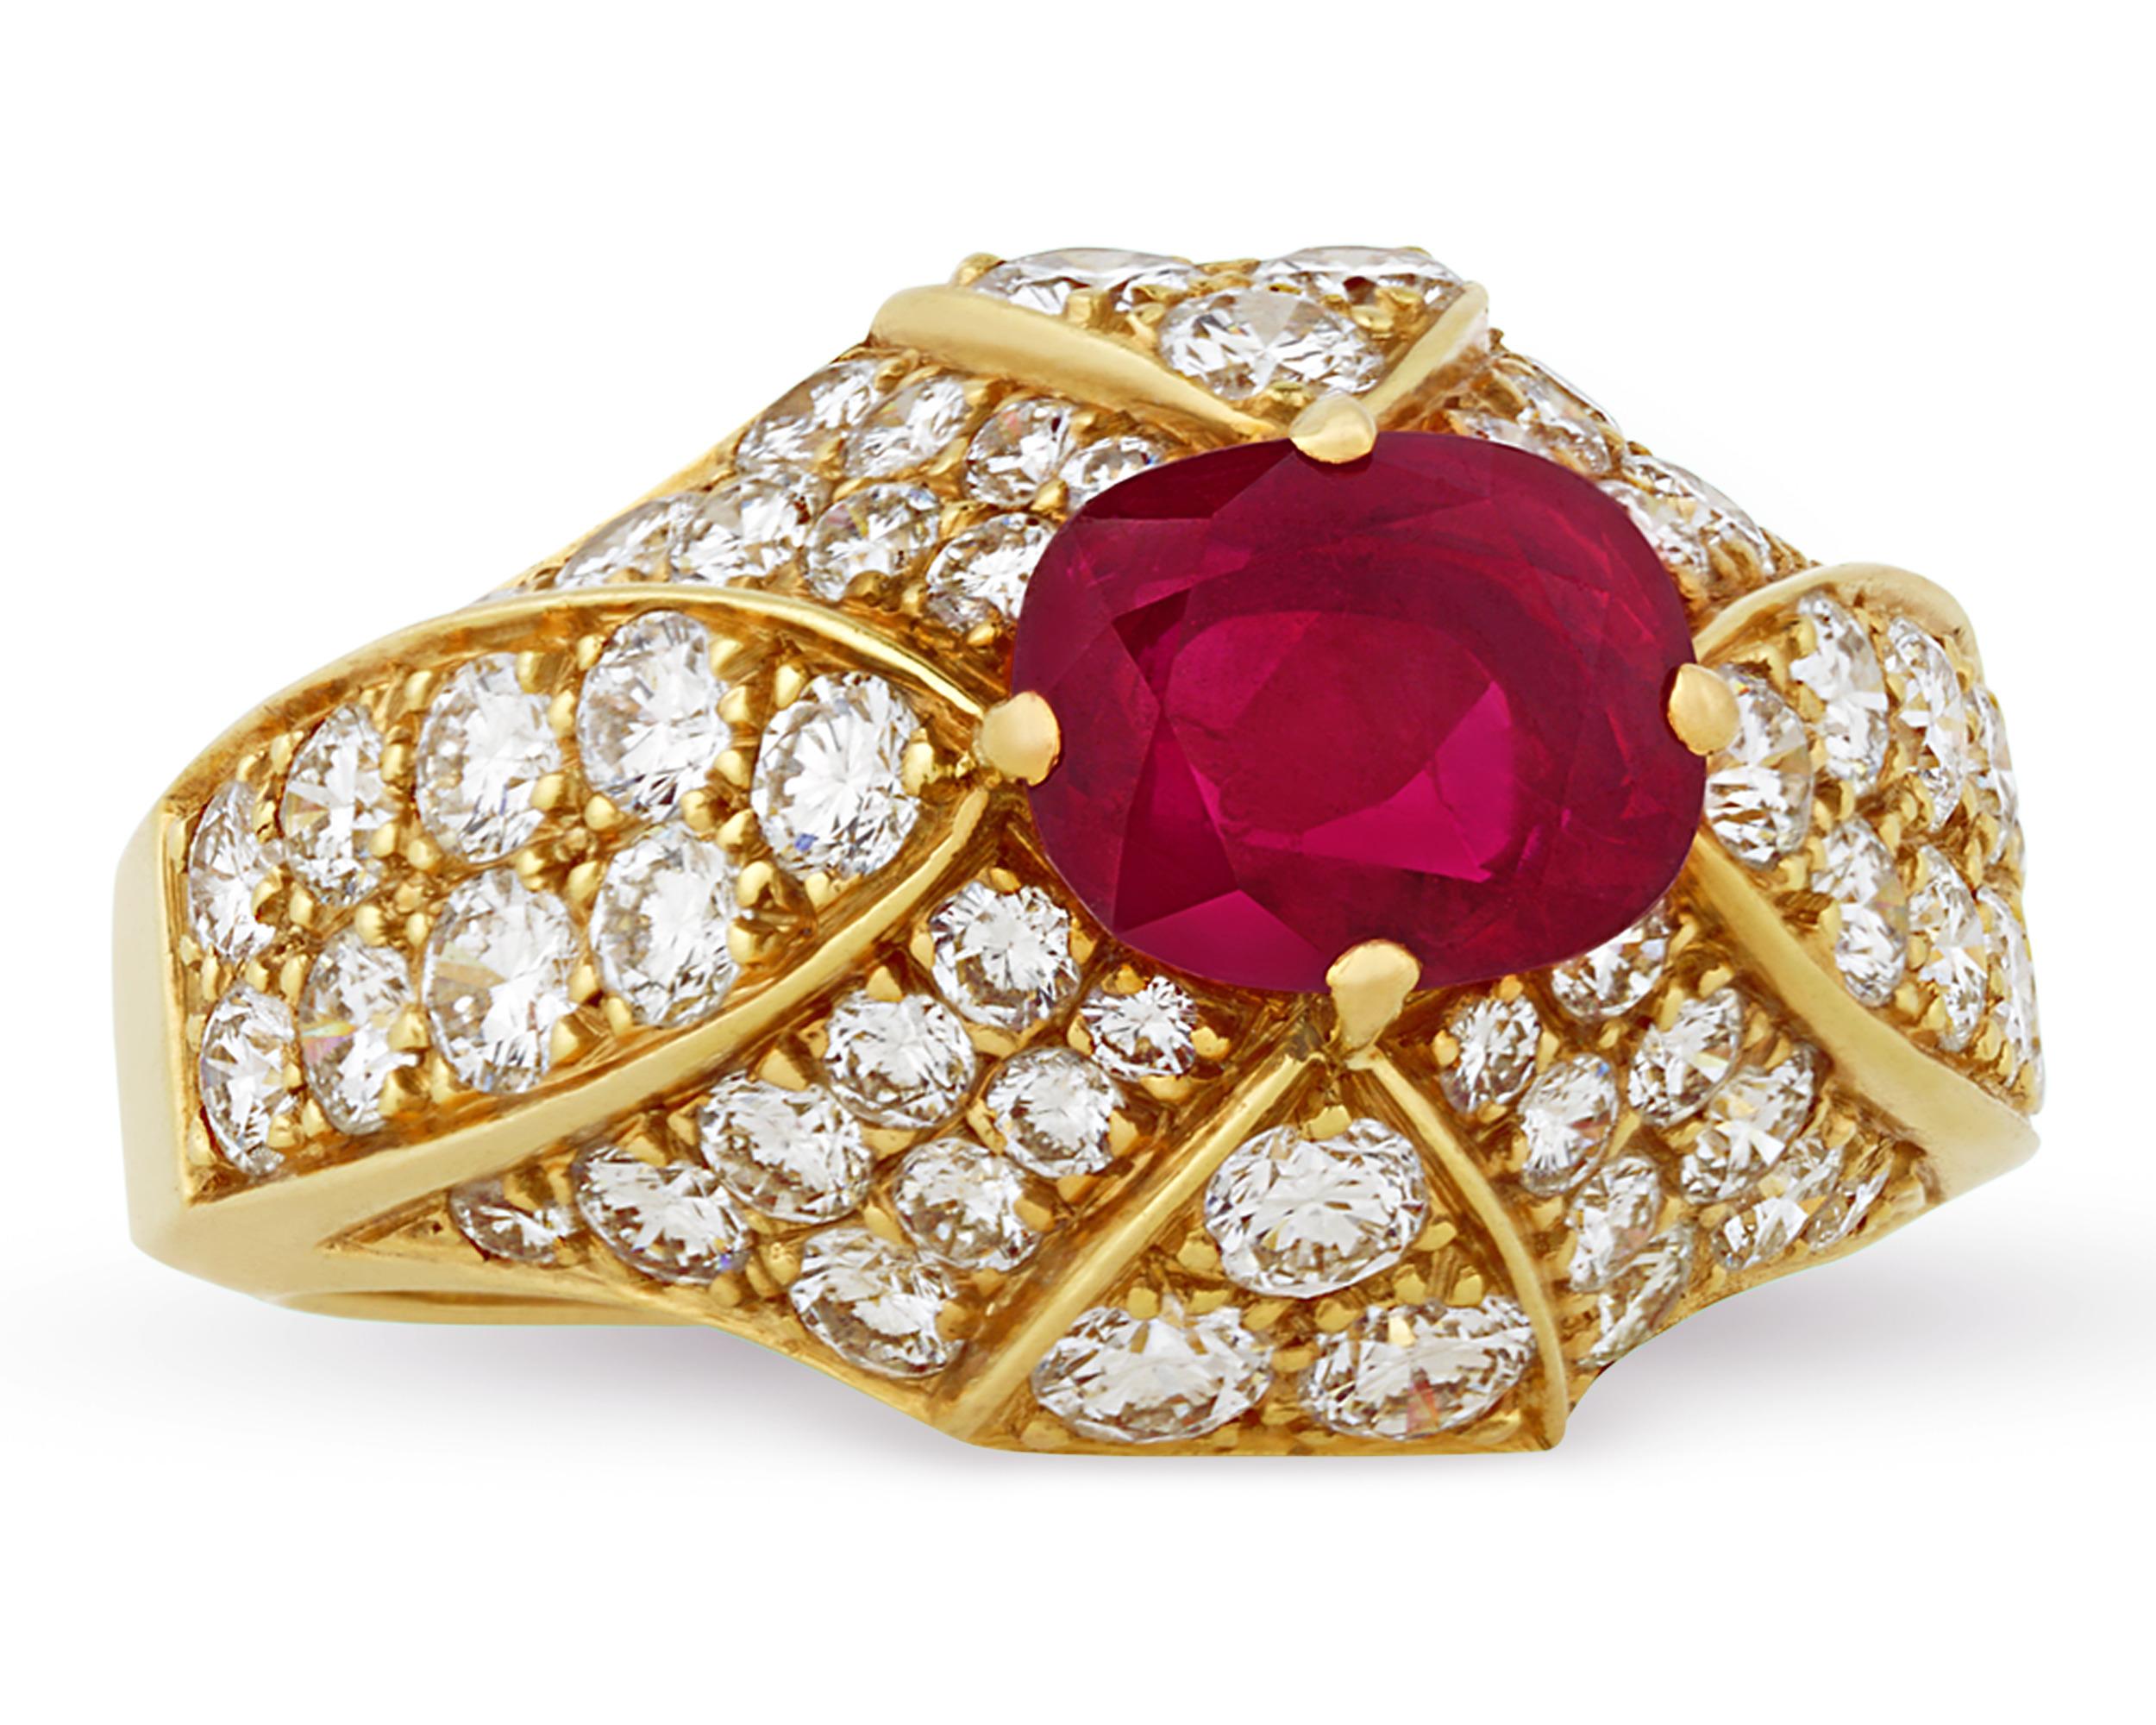 Elegant and sophisticated, this Cartier ring features a stunning ruby weighing 0.70 carats. The crimson red gemstone is accented by 60 round brilliant diamonds, totaling approximately 3.00 carats, and is set in 18K yellow gold.

Founded in Paris in